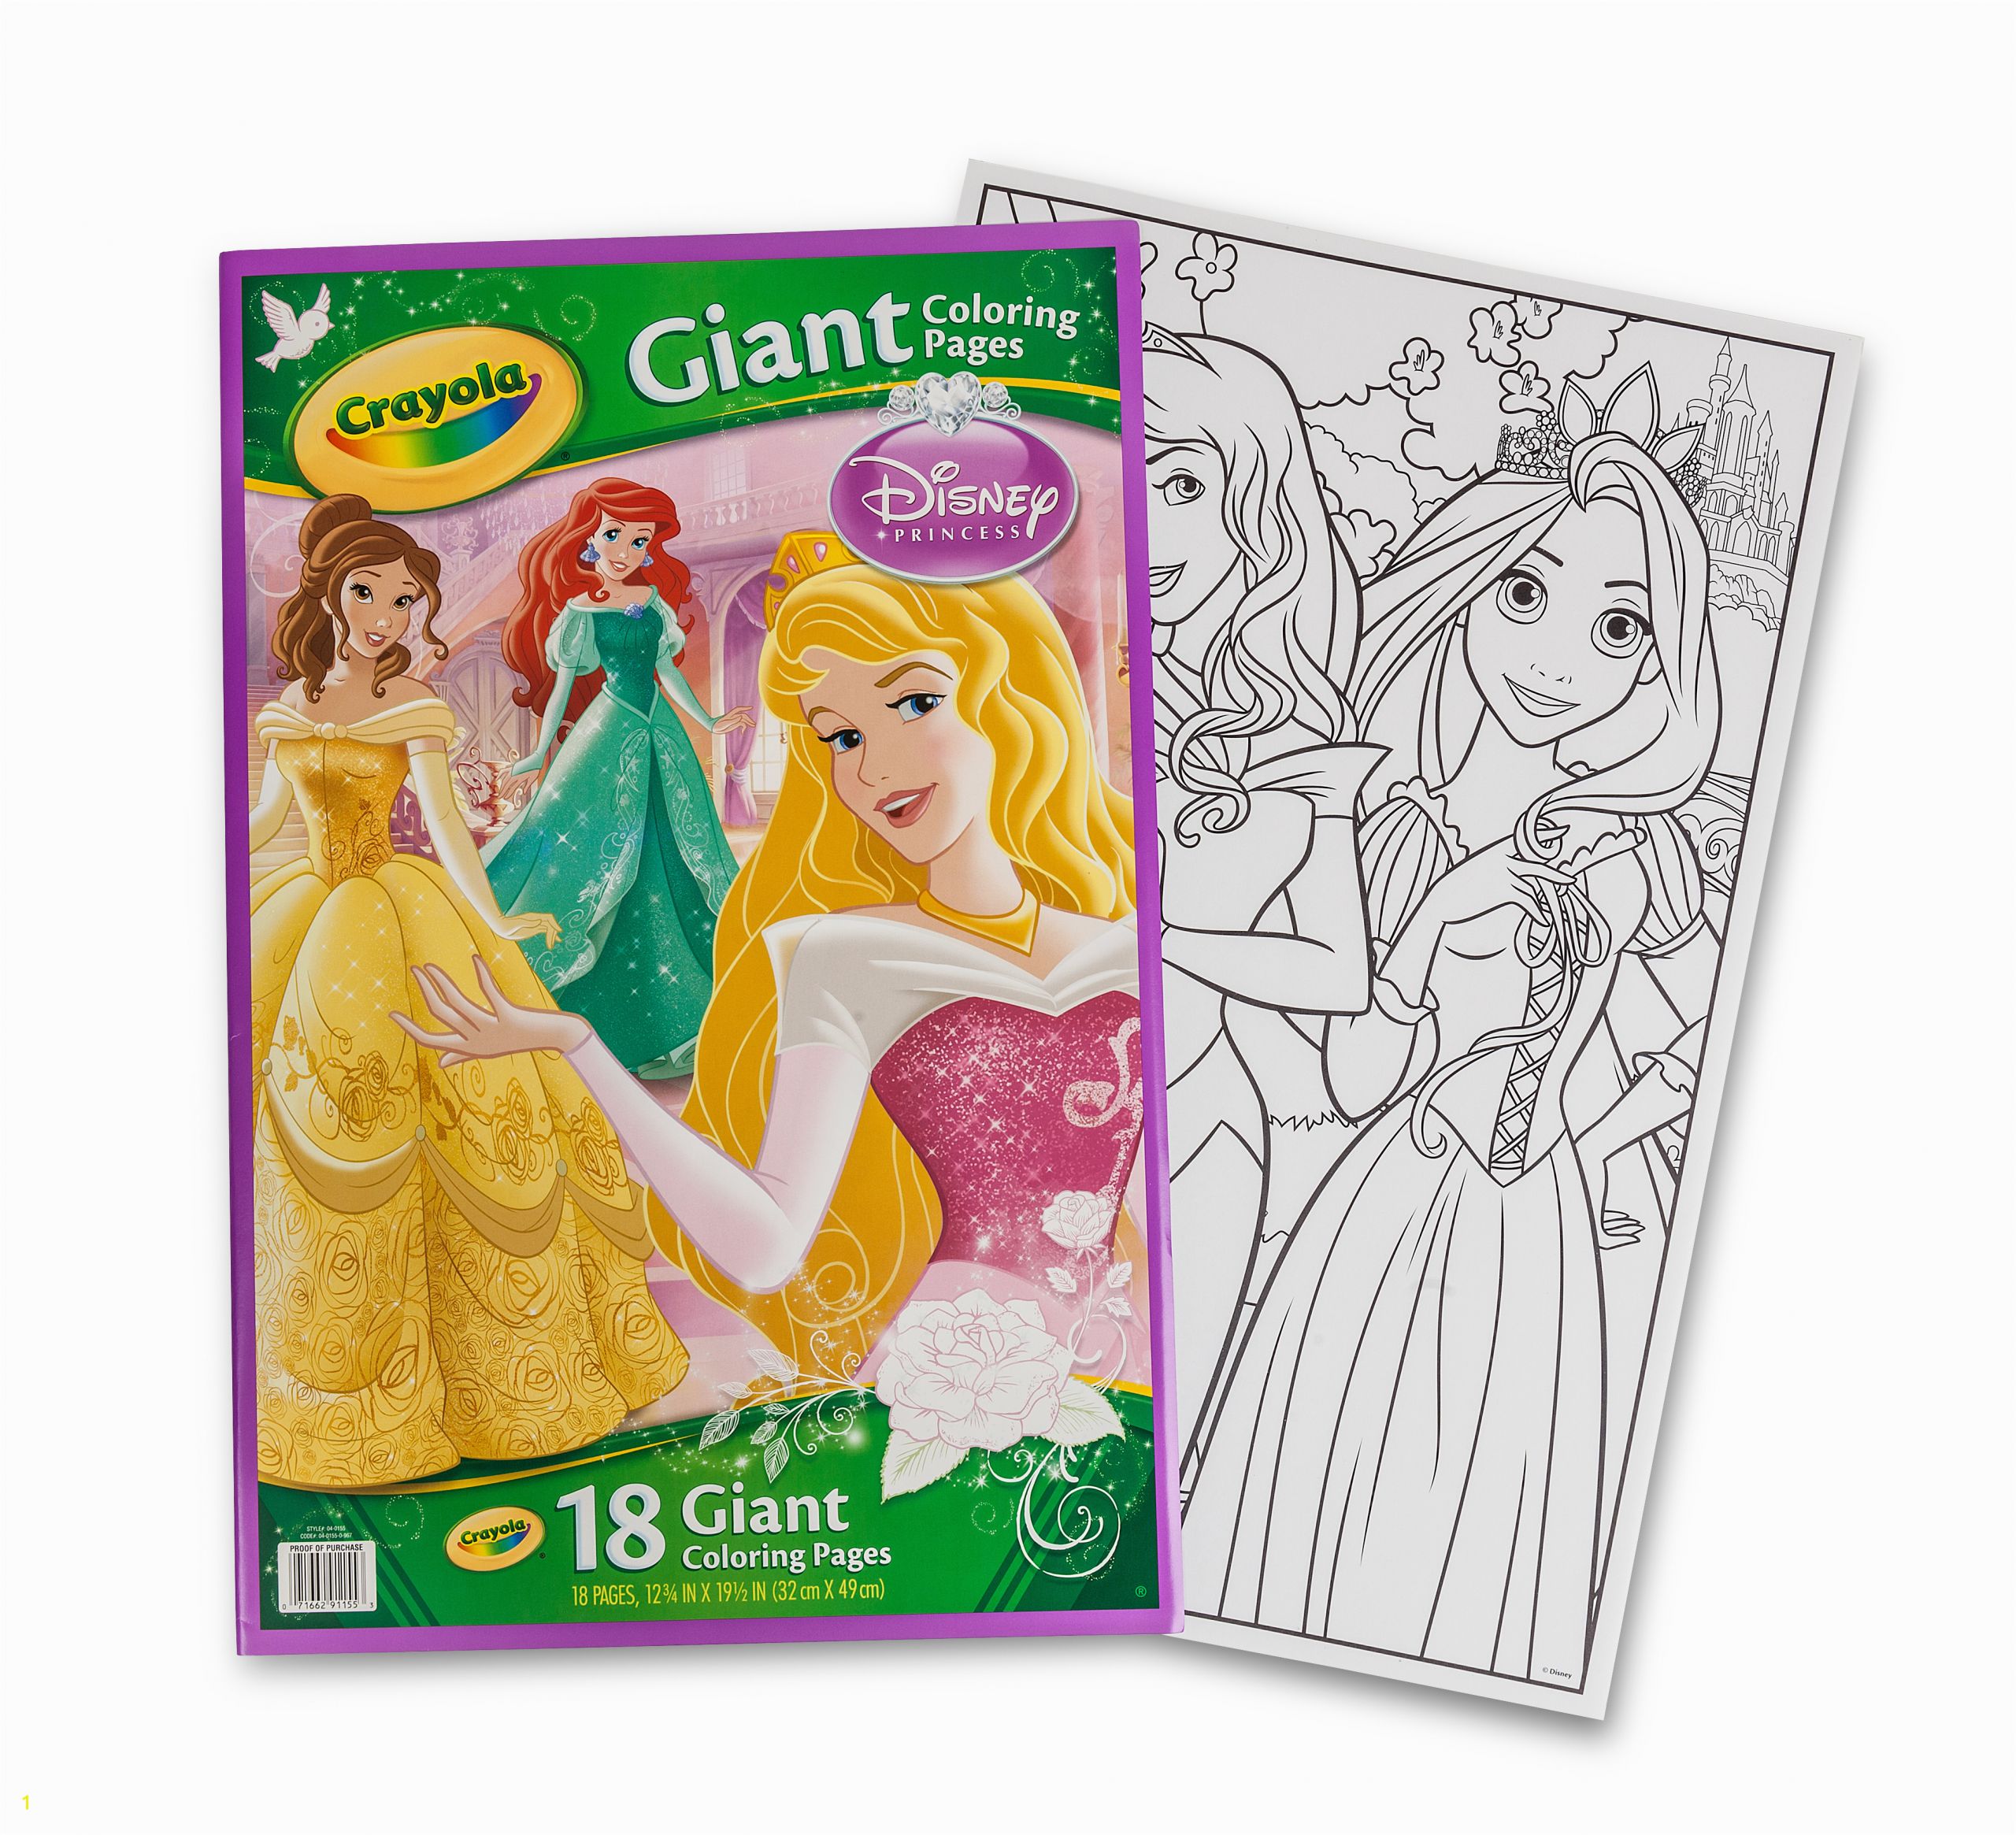 Crayola Giant Coloring Pages Disney Princess Giant Coloring Pages Disney Princess